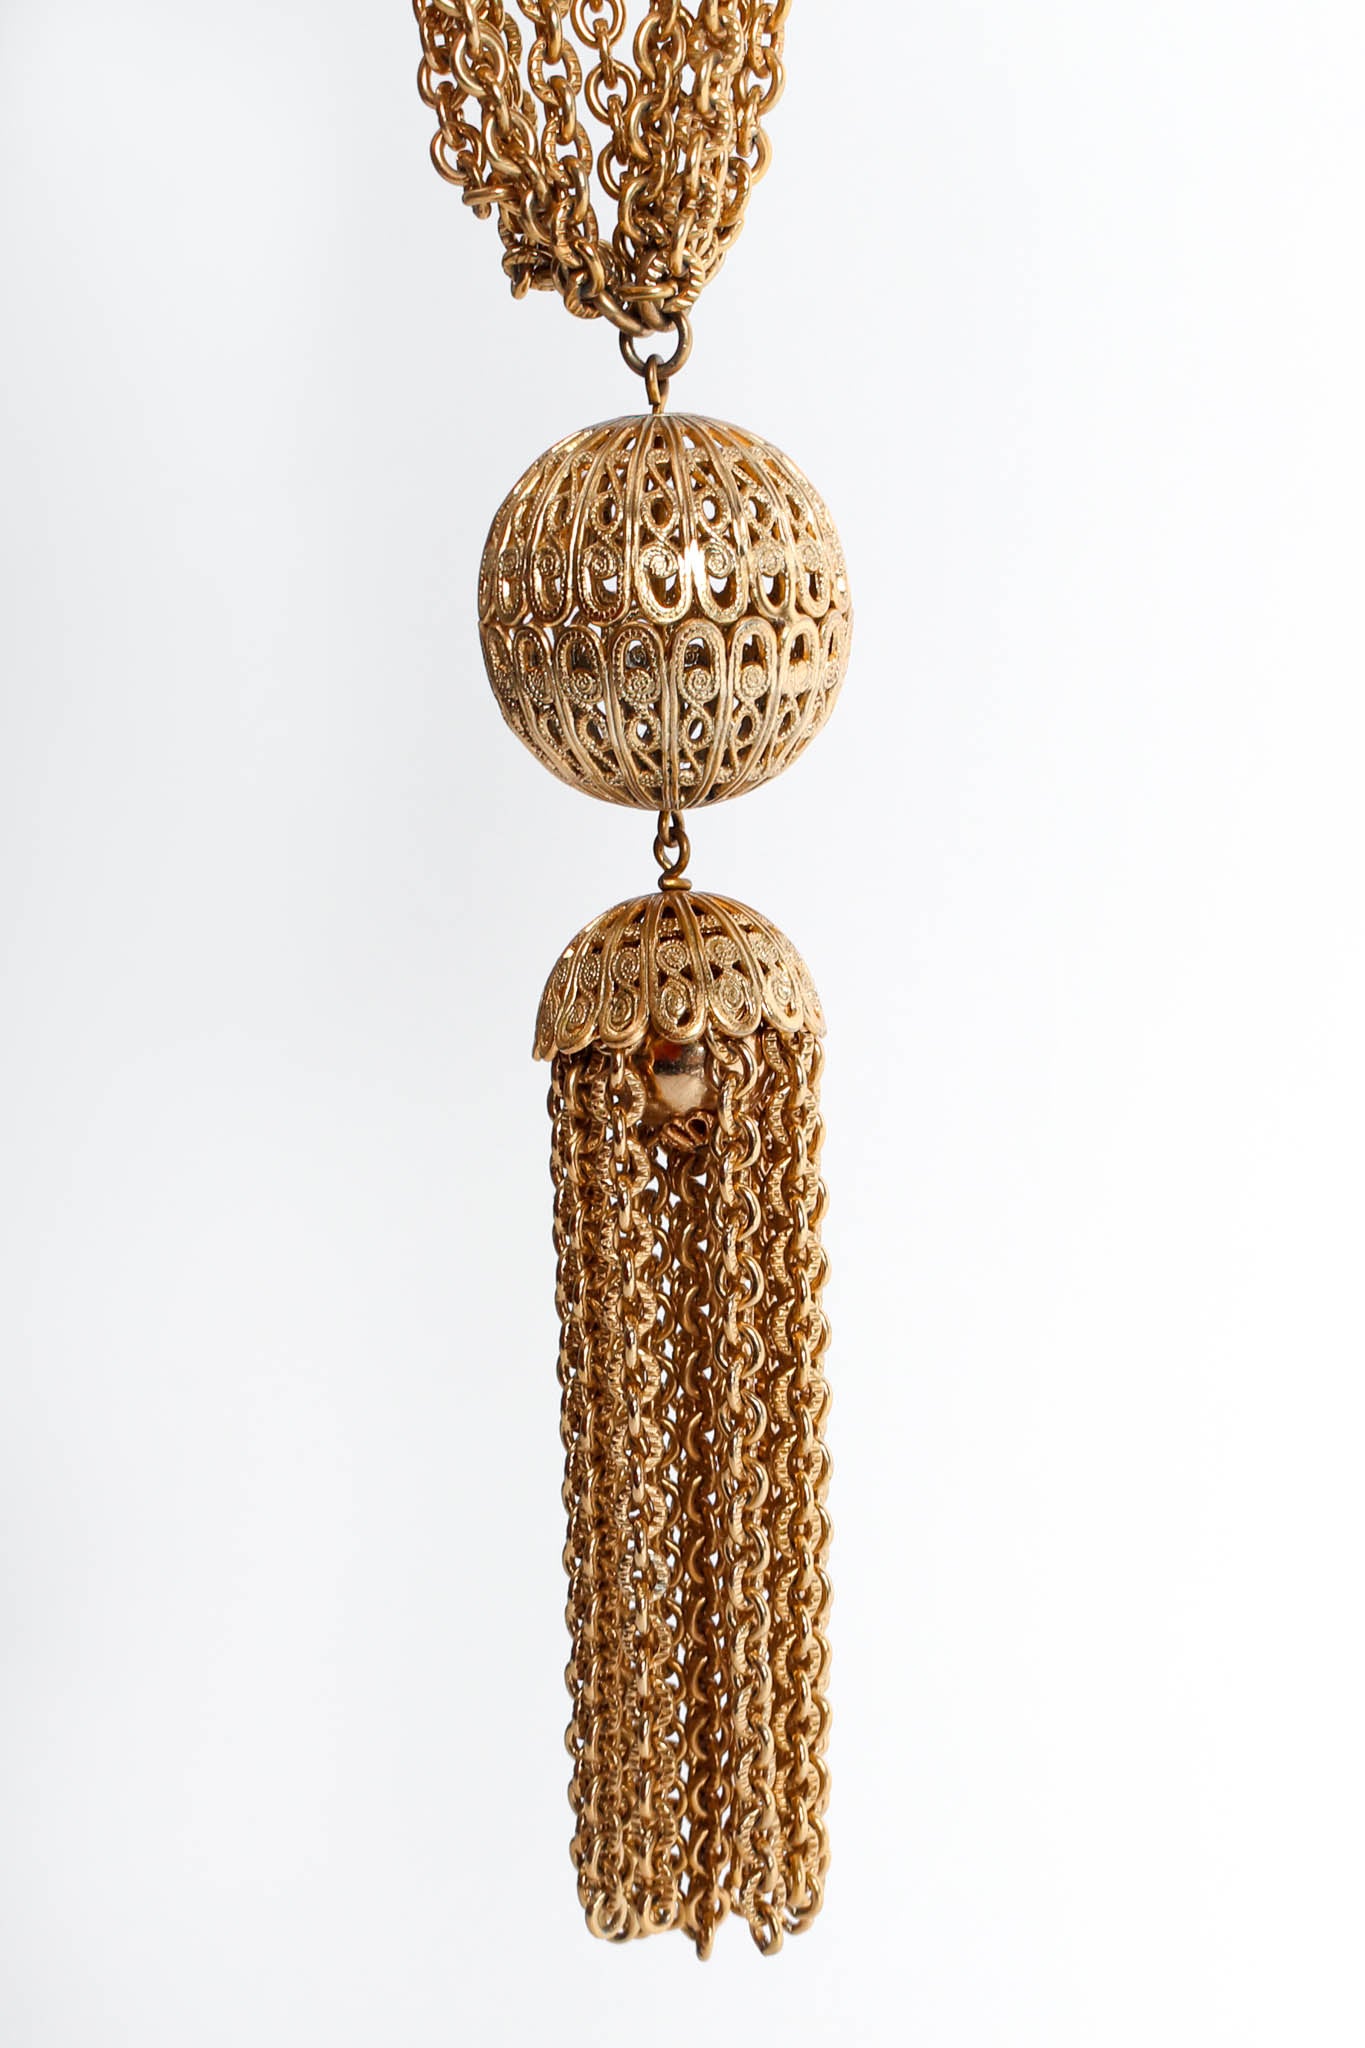 Vintage Tiered Filigree Globe Necklace missing chains on drop close detail @ Recess Los Angeles